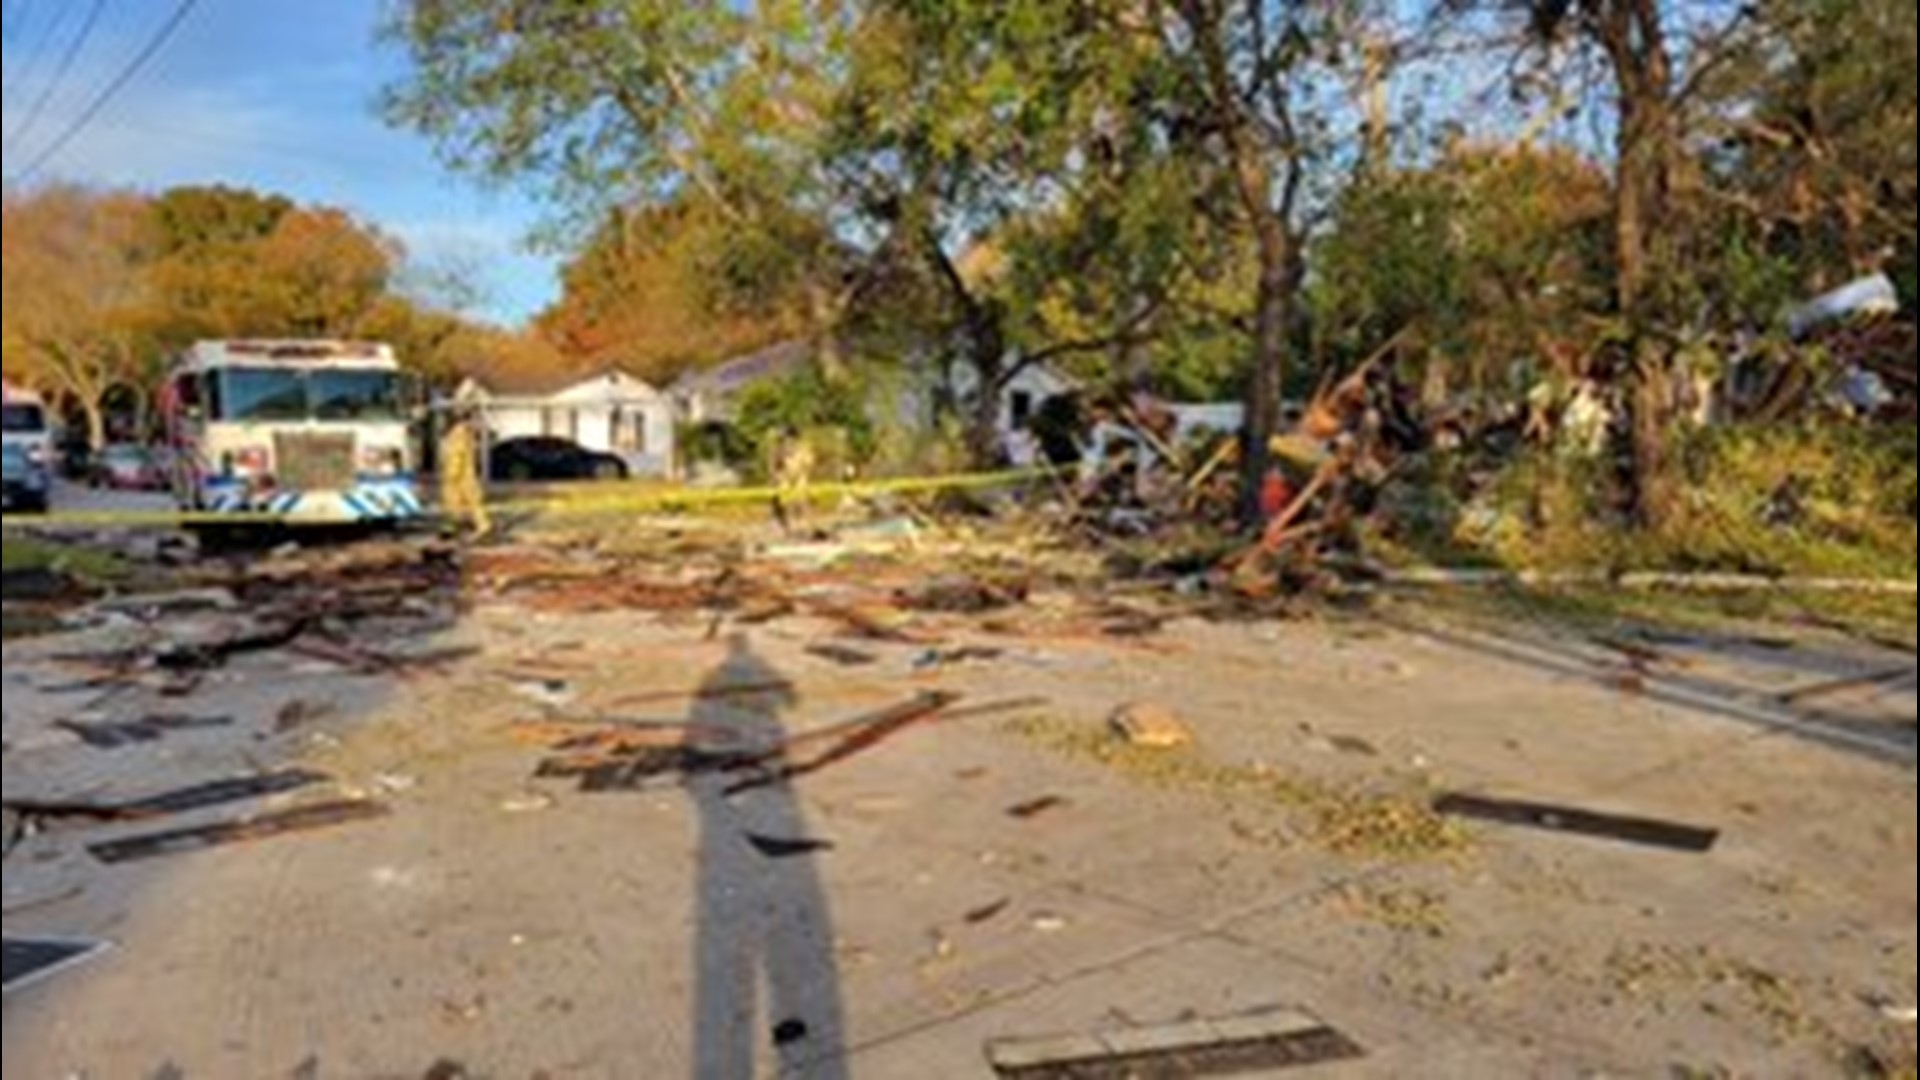 One person was in critical condition after a reported house explosion in Westworth Village, a small city in the west Fort Worth area.